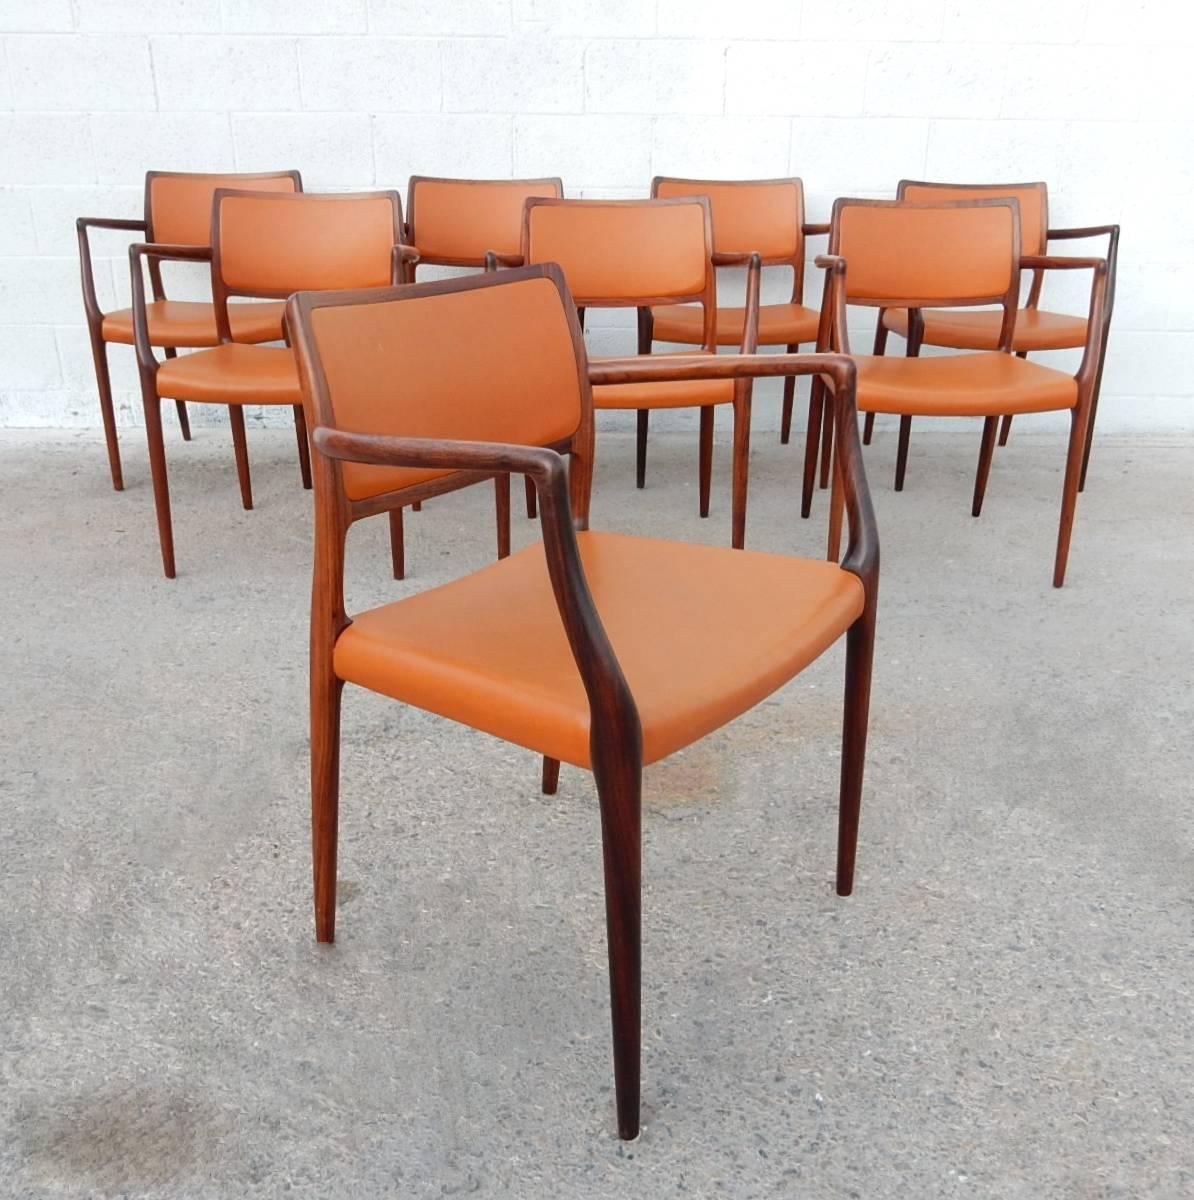 Set of eight exotic wood and leather arm chairs designed by Niels Otto Møller for T.L. Moller of Denmark, chair model #65.
Gorgeous, elegant chairs with sleek lines and amazing wood grain.
All are marked with T.L. Moller brand.

Each chair has been